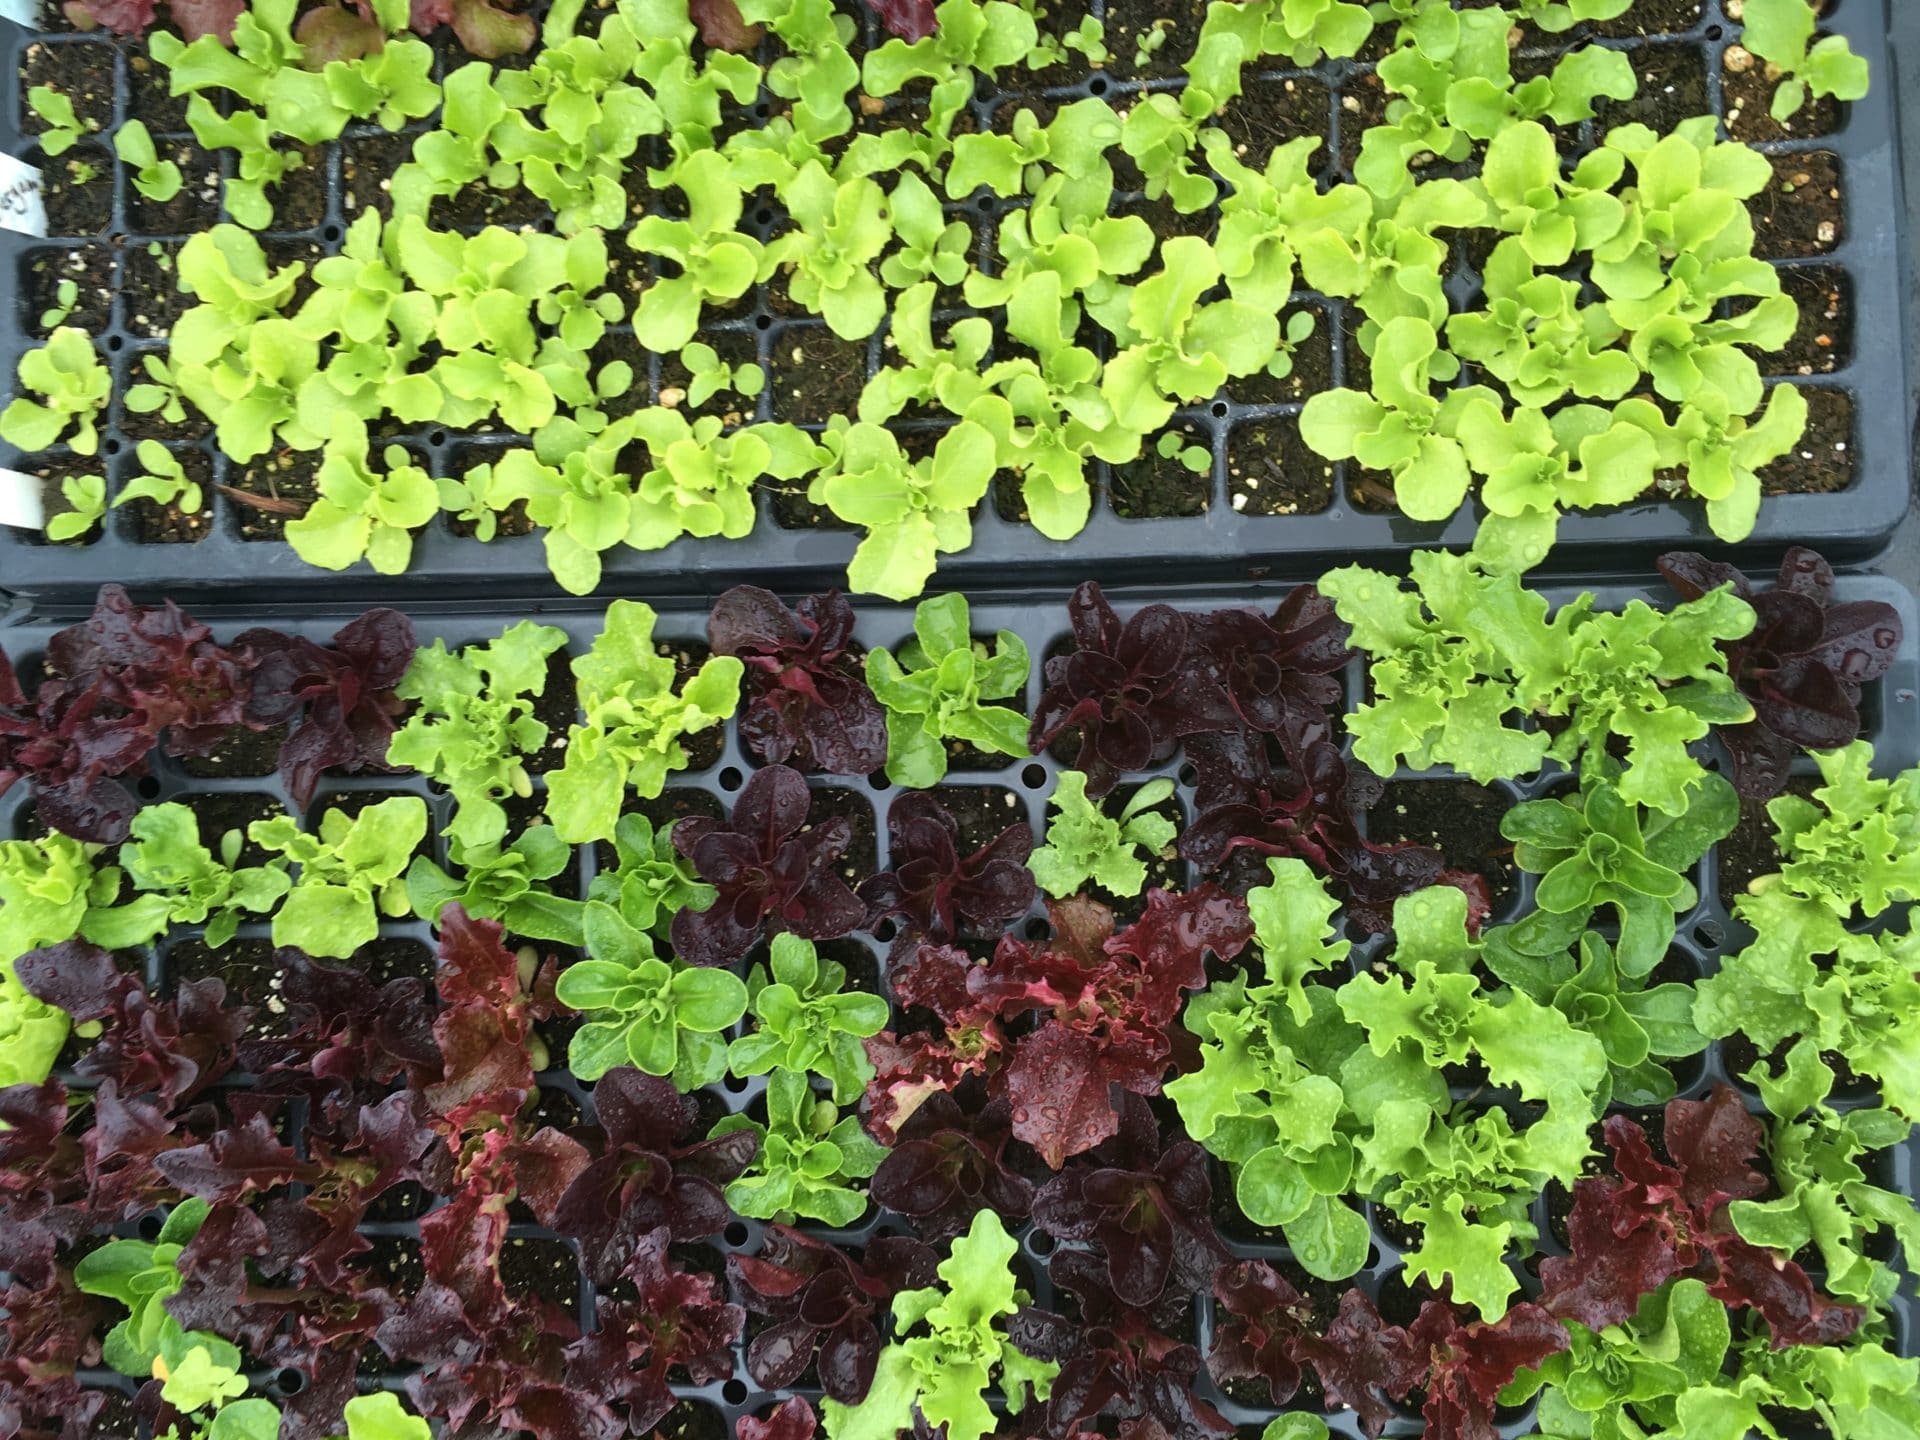 Trays of Greens being prepared to go in the ground at an organic vegetable farm